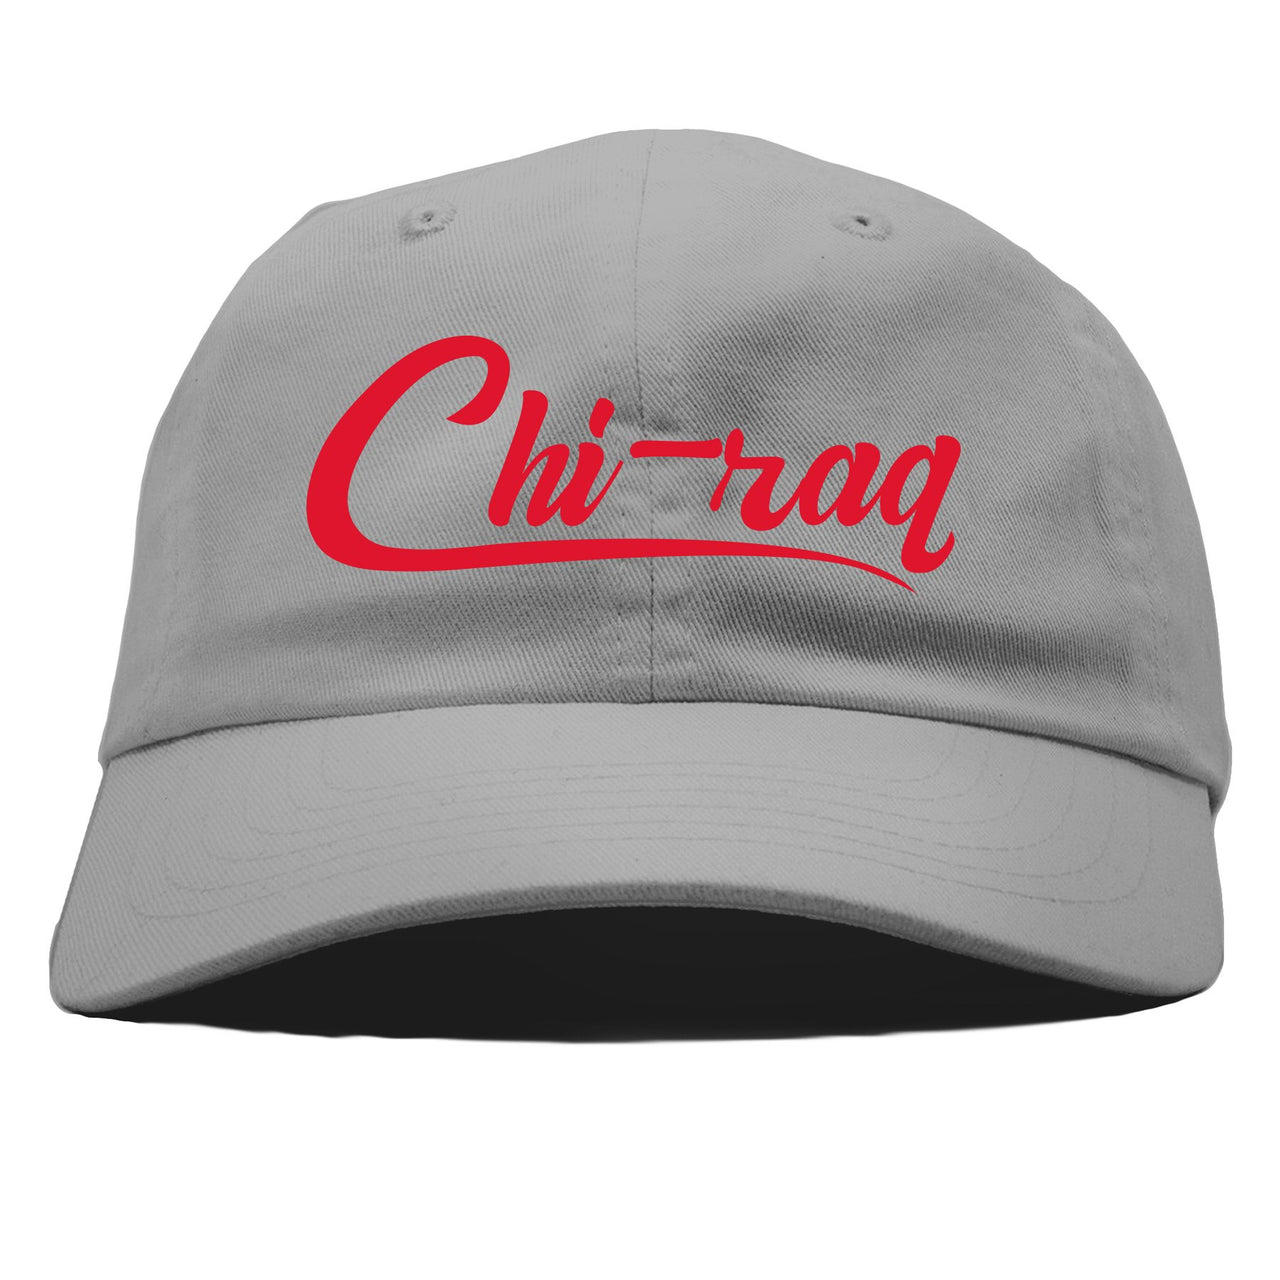 Reflections of a Champion 7s Dad Hat | Chiraq Script, Gray